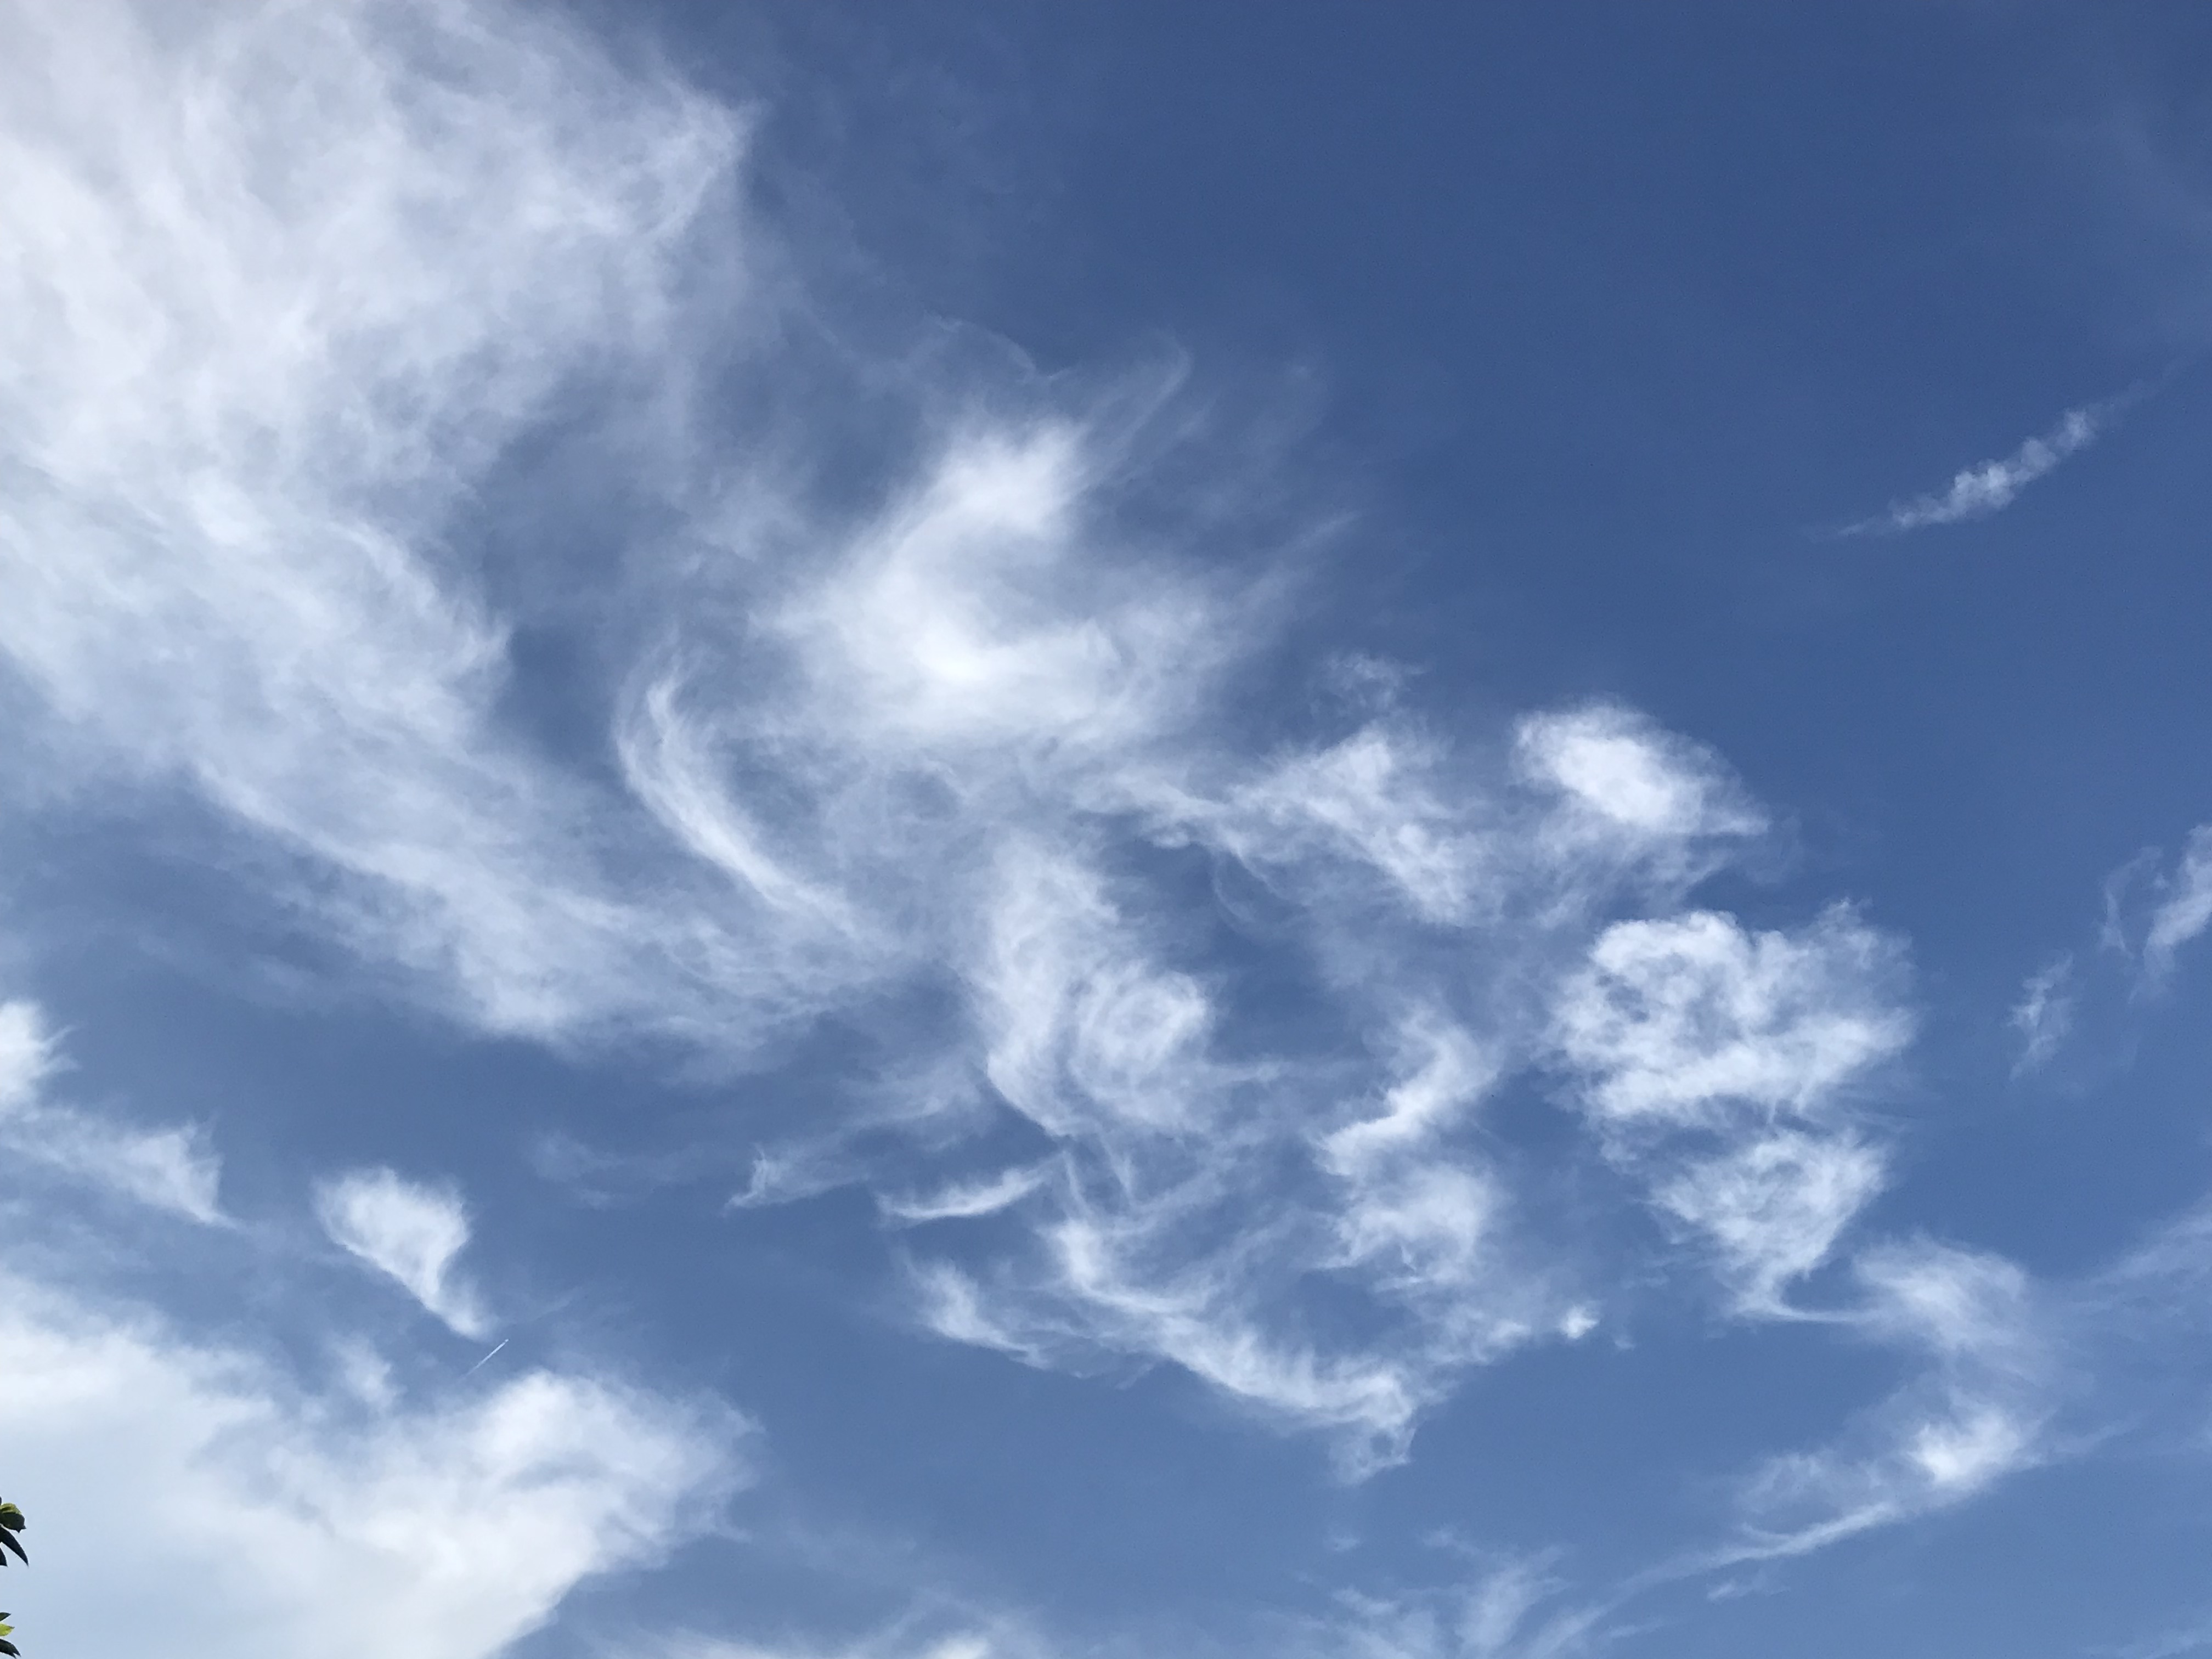 File:Cirrus Clouds 01.jpg - Wikimedia Commons